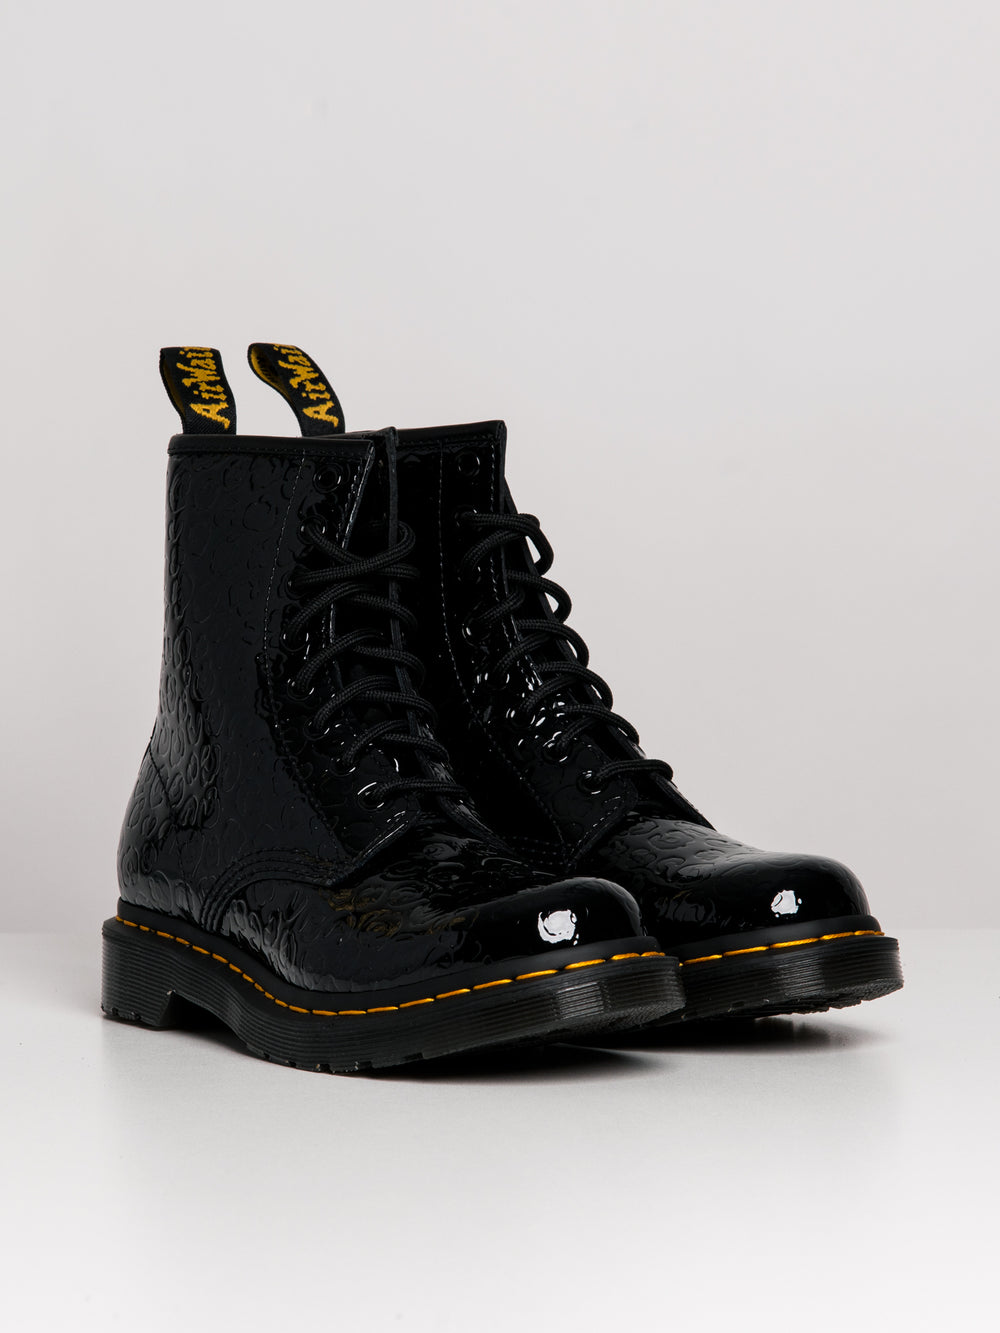 WOMENS DR MARTENS 1460 PATENT EMBOSS PLATFORM LEATHER BOOT - CLEARANCE